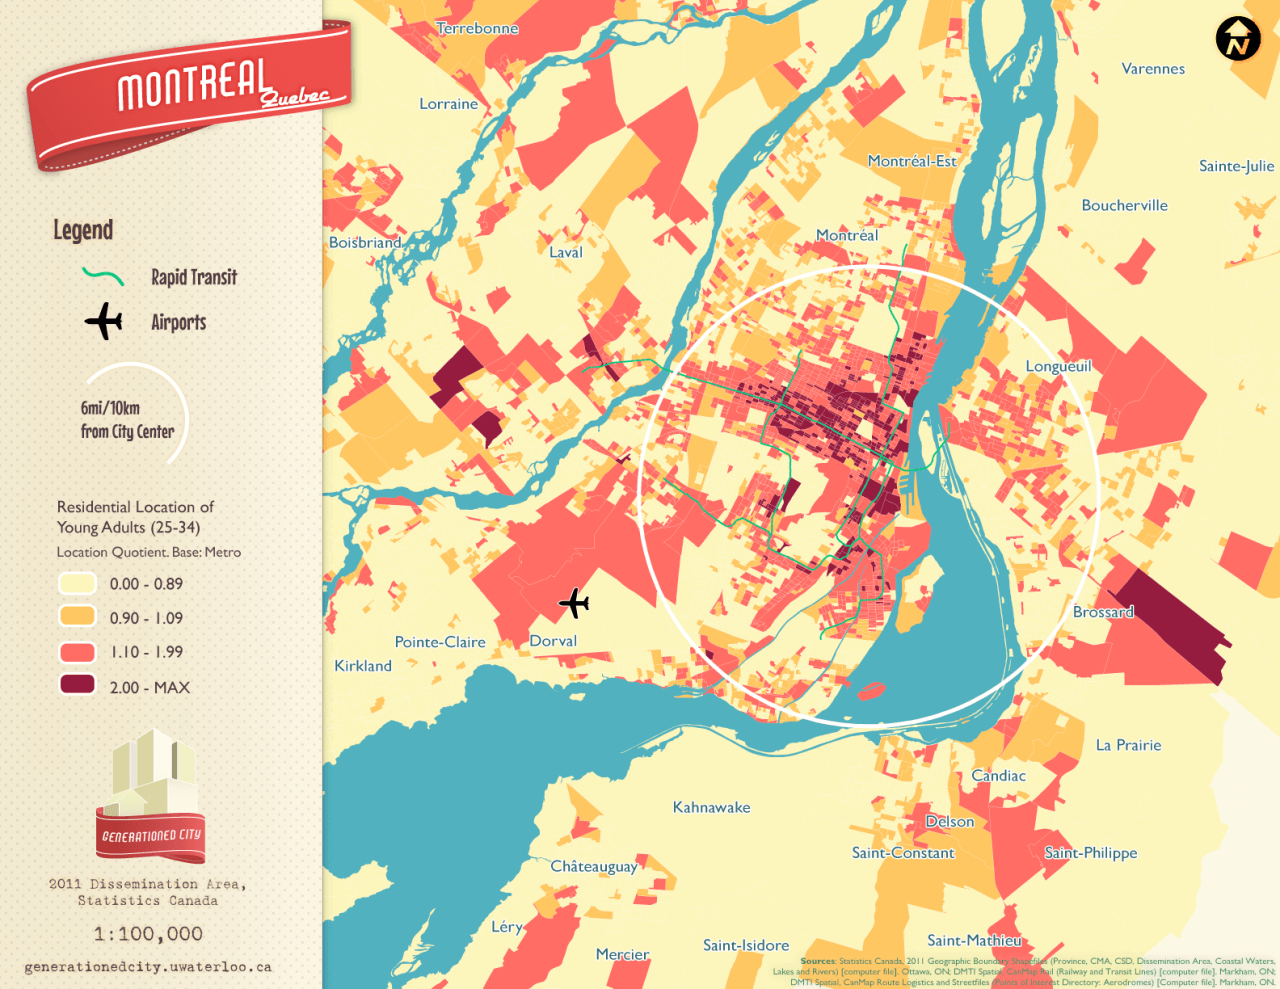 Residential location of young adults in Montreal.